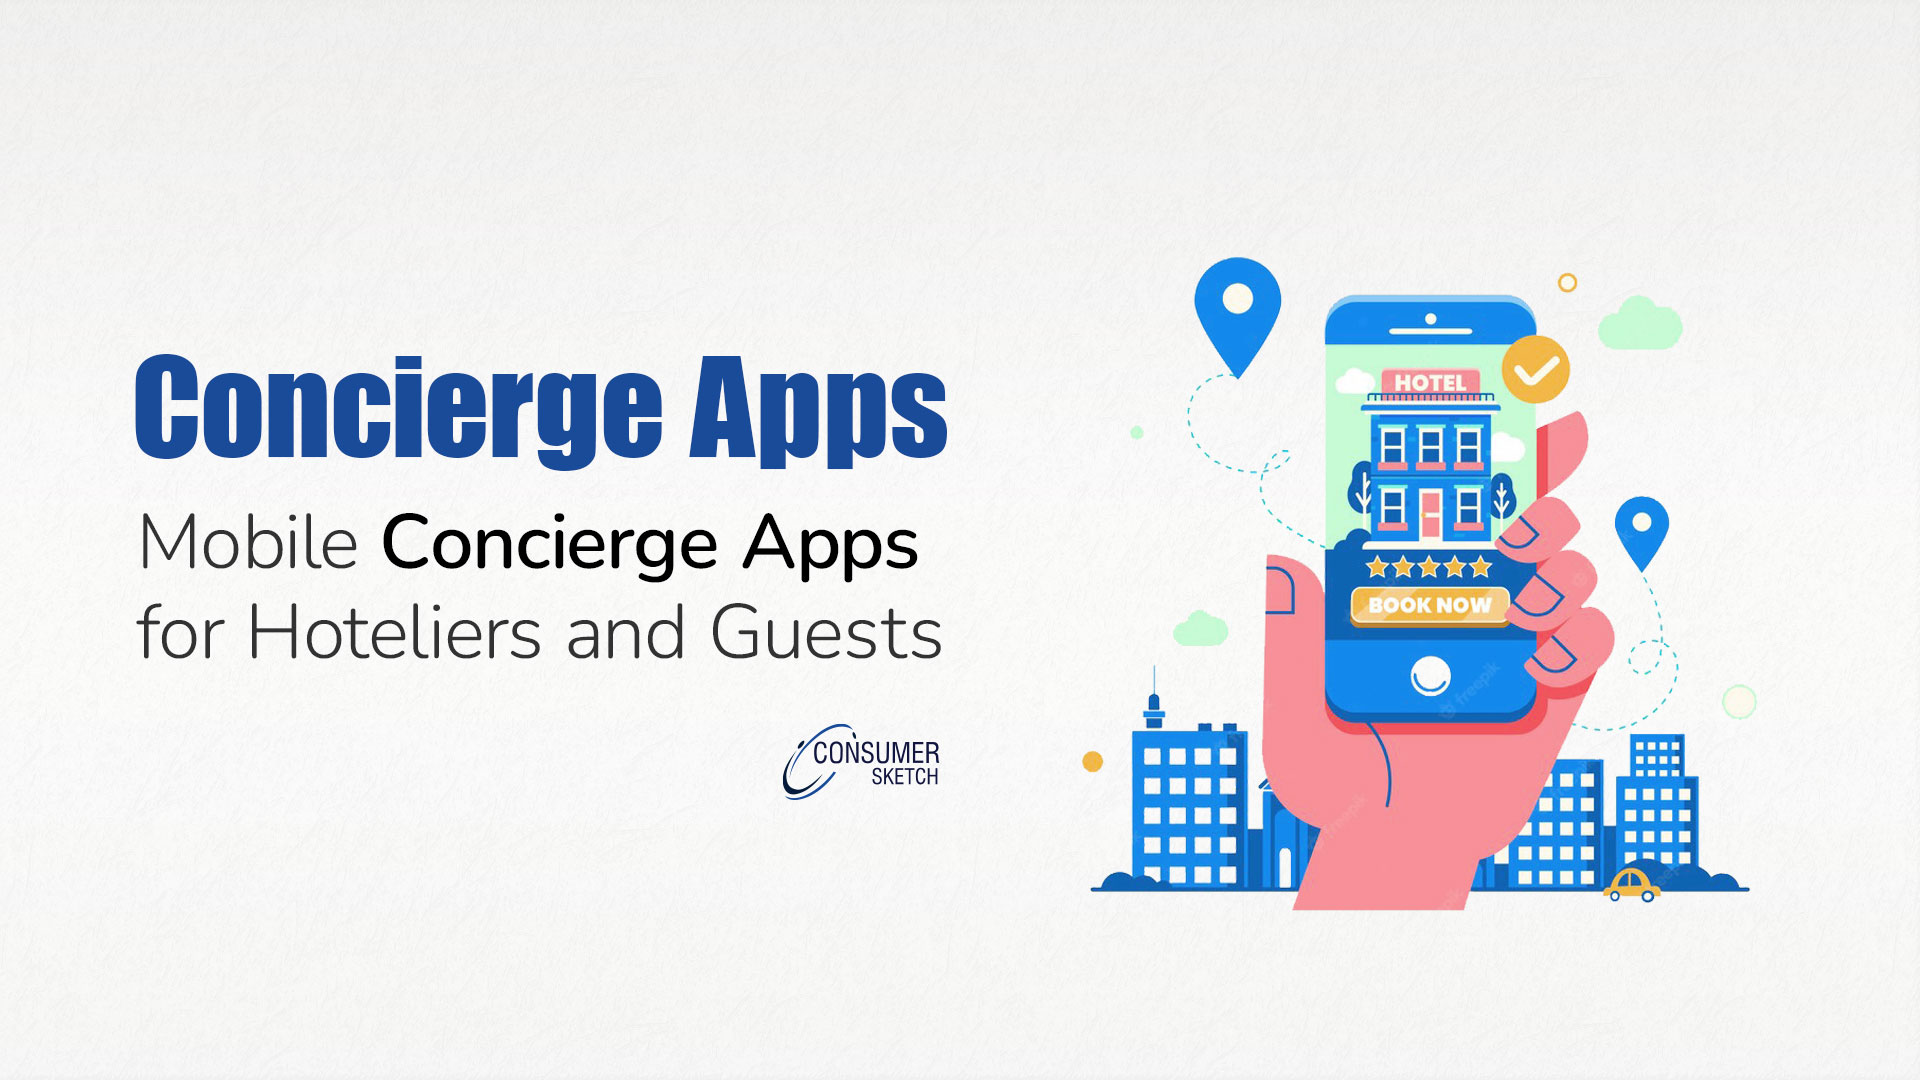 What are Mobile Concierge Apps?